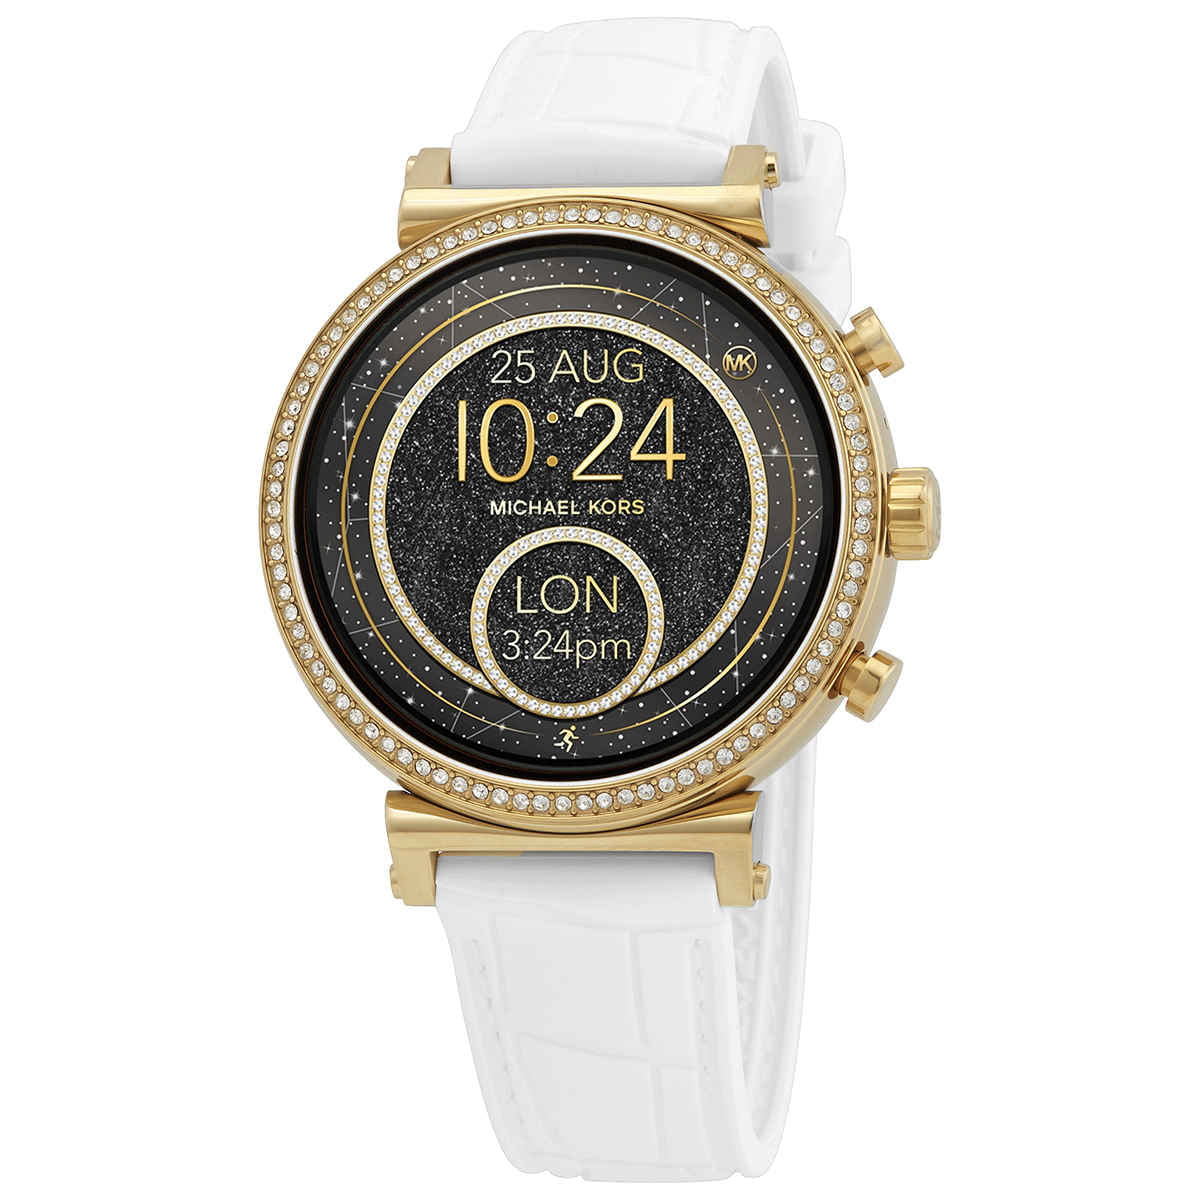 Kors - Access Heart Rate Smartwatch 41mm Steel - White Silicone - Walmart.com